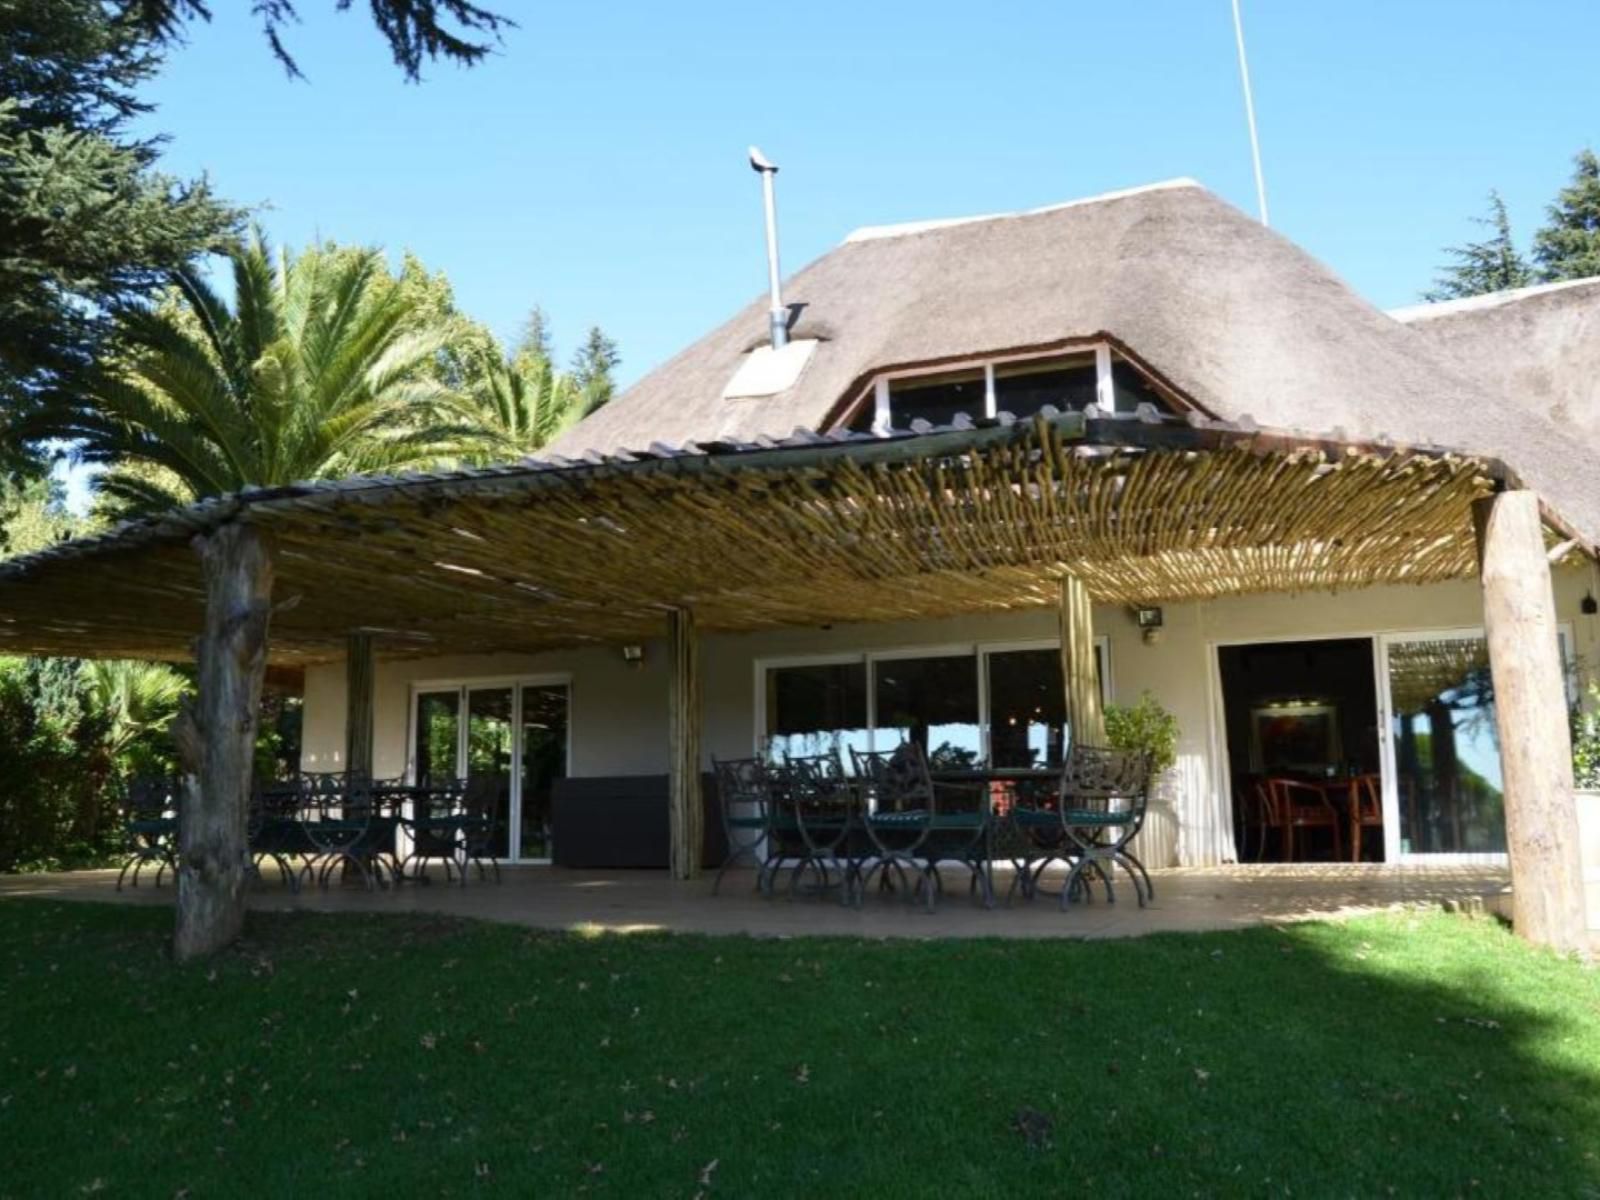 Highveld Splendour Boutique Bed And Breakfast Ermelo Mpumalanga South Africa House, Building, Architecture, Palm Tree, Plant, Nature, Wood